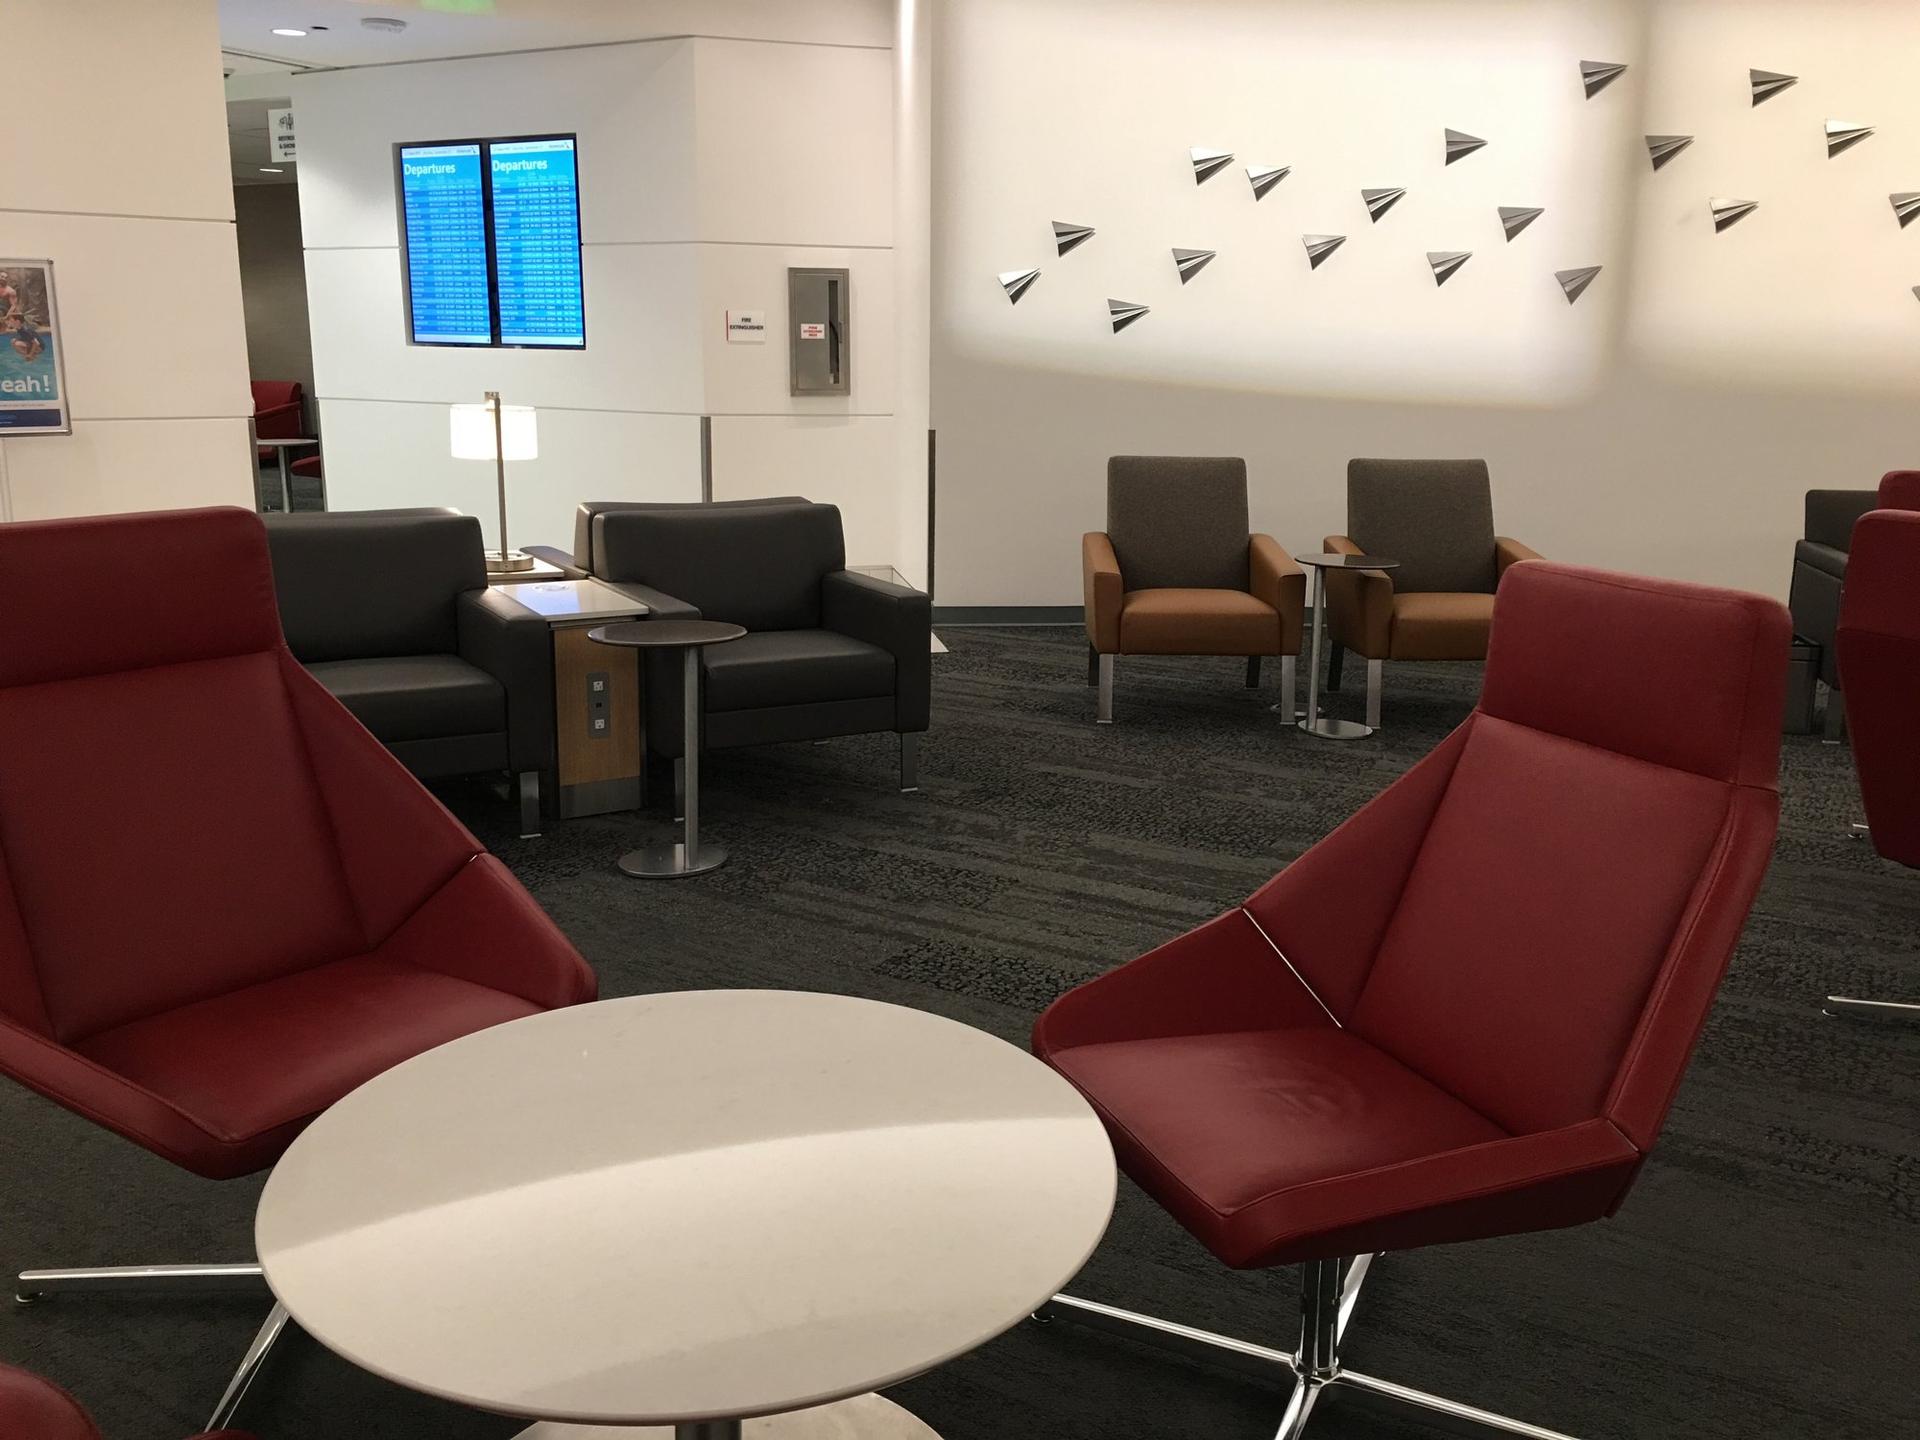 American Airlines Admirals Club image 23 of 38